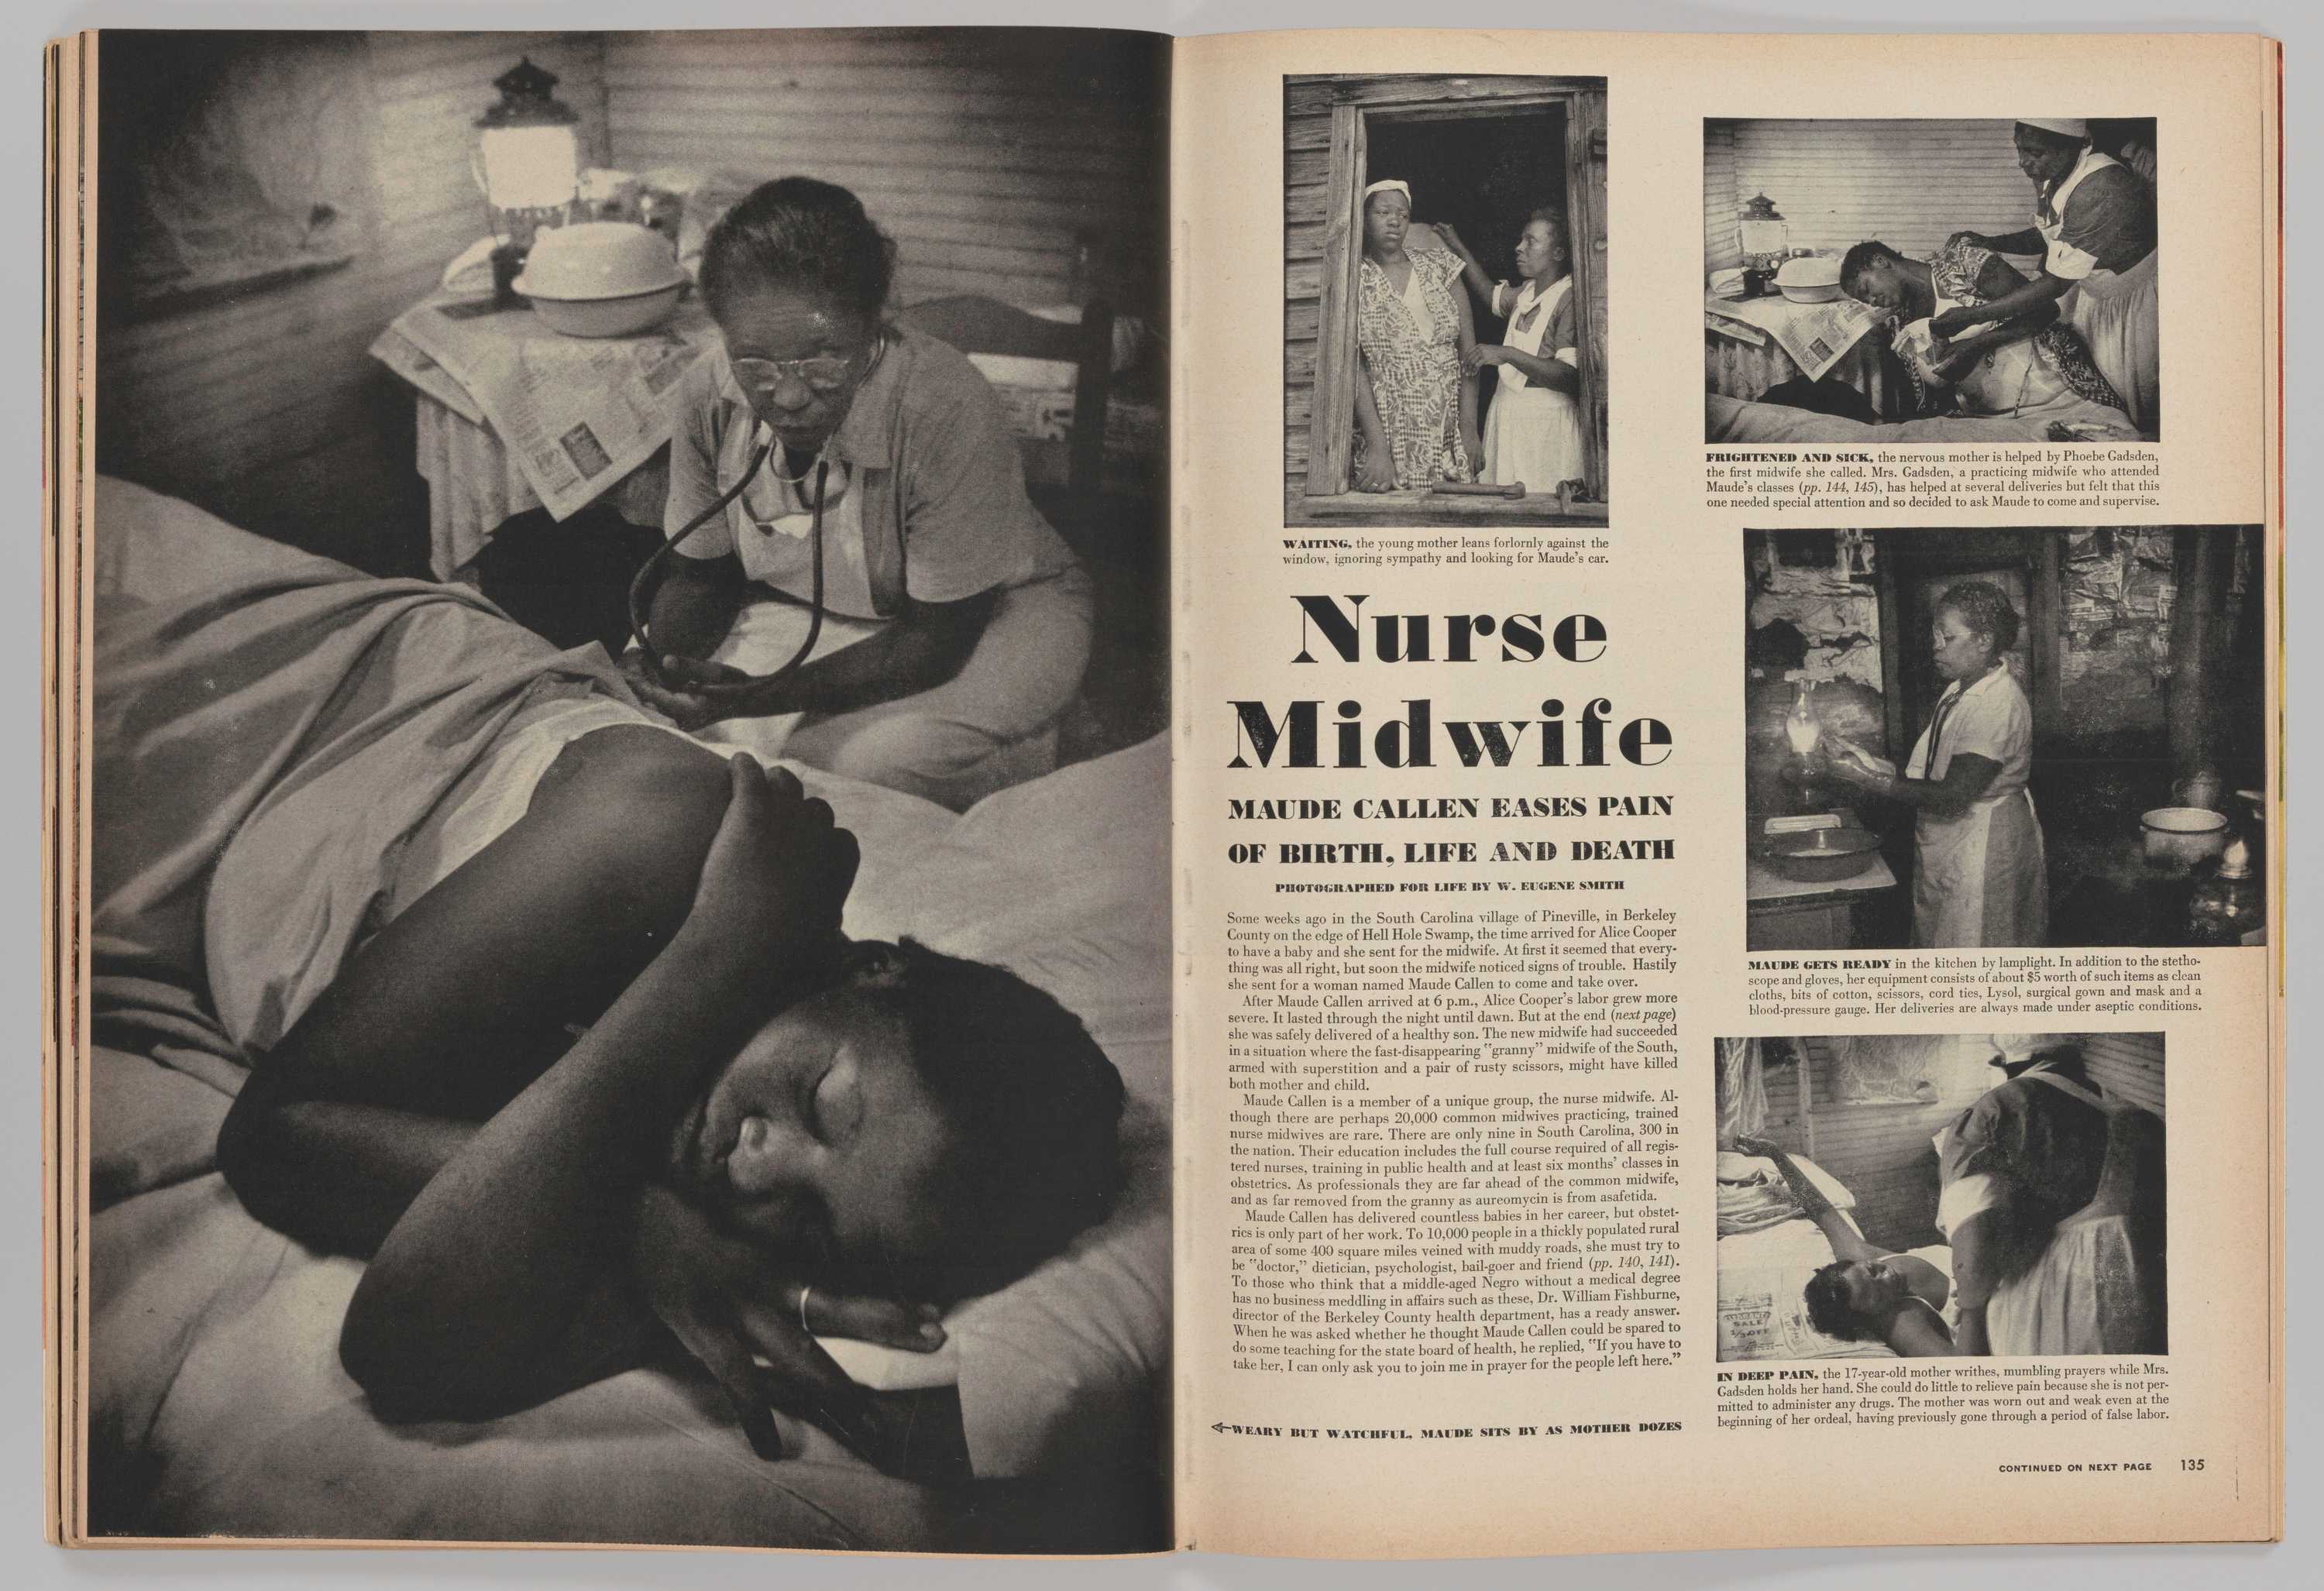 A December 3, 1951 issue of Life magazine containing a photographic essay by W. Eugene Smith of the midwife Maude E. Callen.